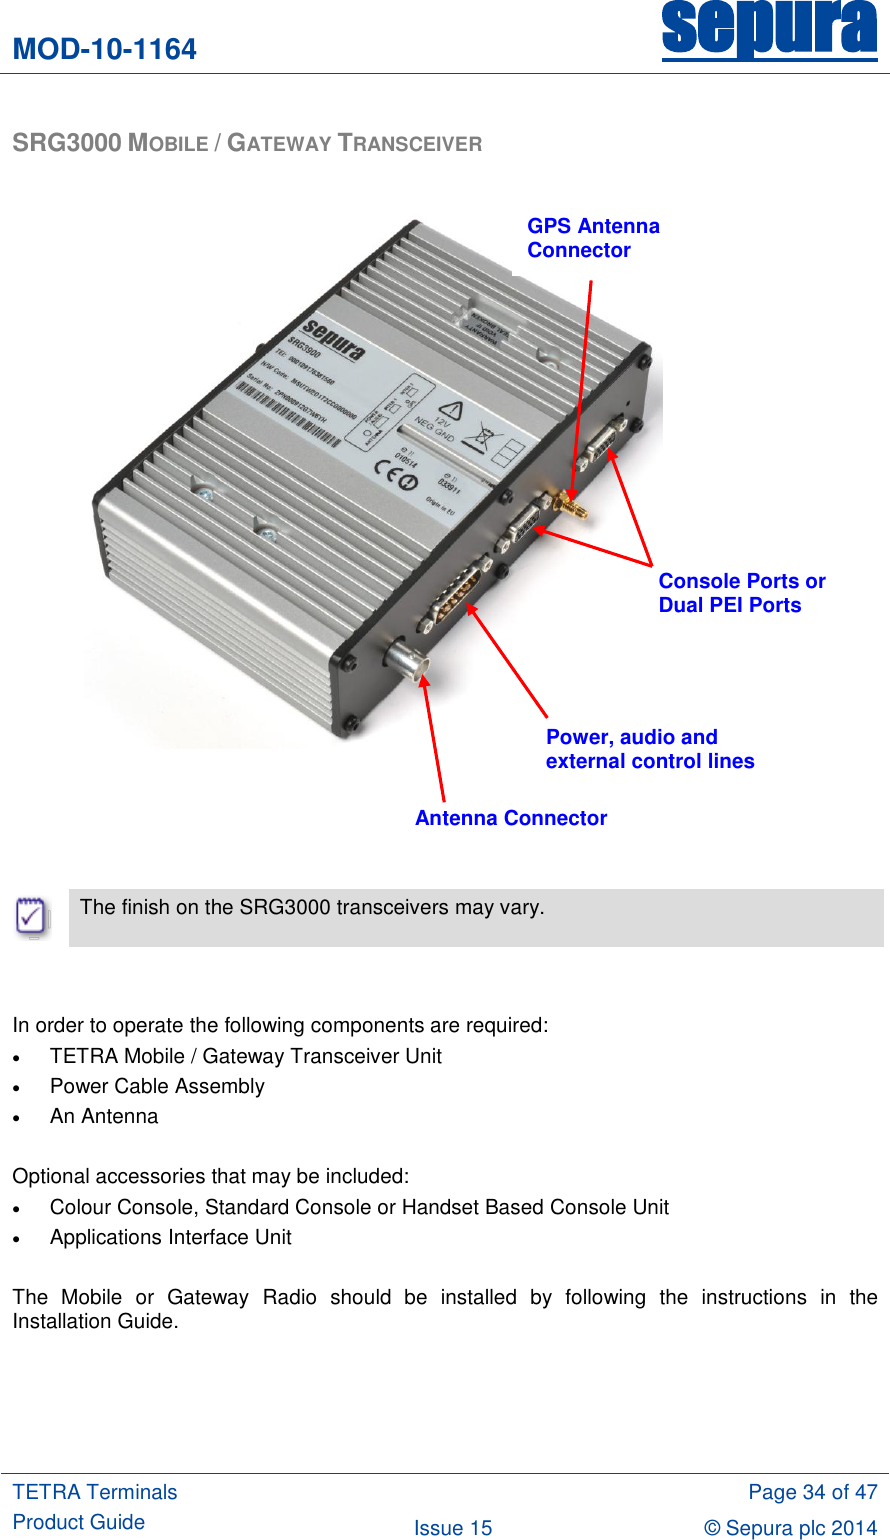 MOD-10-1164 sepura  TETRA Terminals Product Guide  Page 34 of 47 Issue 15 © Sepura plc 2014   SRG3000 MOBILE / GATEWAY TRANSCEIVER                          The finish on the SRG3000 transceivers may vary.   In order to operate the following components are required:  TETRA Mobile / Gateway Transceiver Unit  Power Cable Assembly  An Antenna  Optional accessories that may be included:  Colour Console, Standard Console or Handset Based Console Unit  Applications Interface Unit  The  Mobile  or  Gateway  Radio  should  be  installed  by  following  the  instructions  in  the Installation Guide.    Antenna Connector Power, audio and external control lines Console Ports or Dual PEI Ports GPS Antenna Connector 